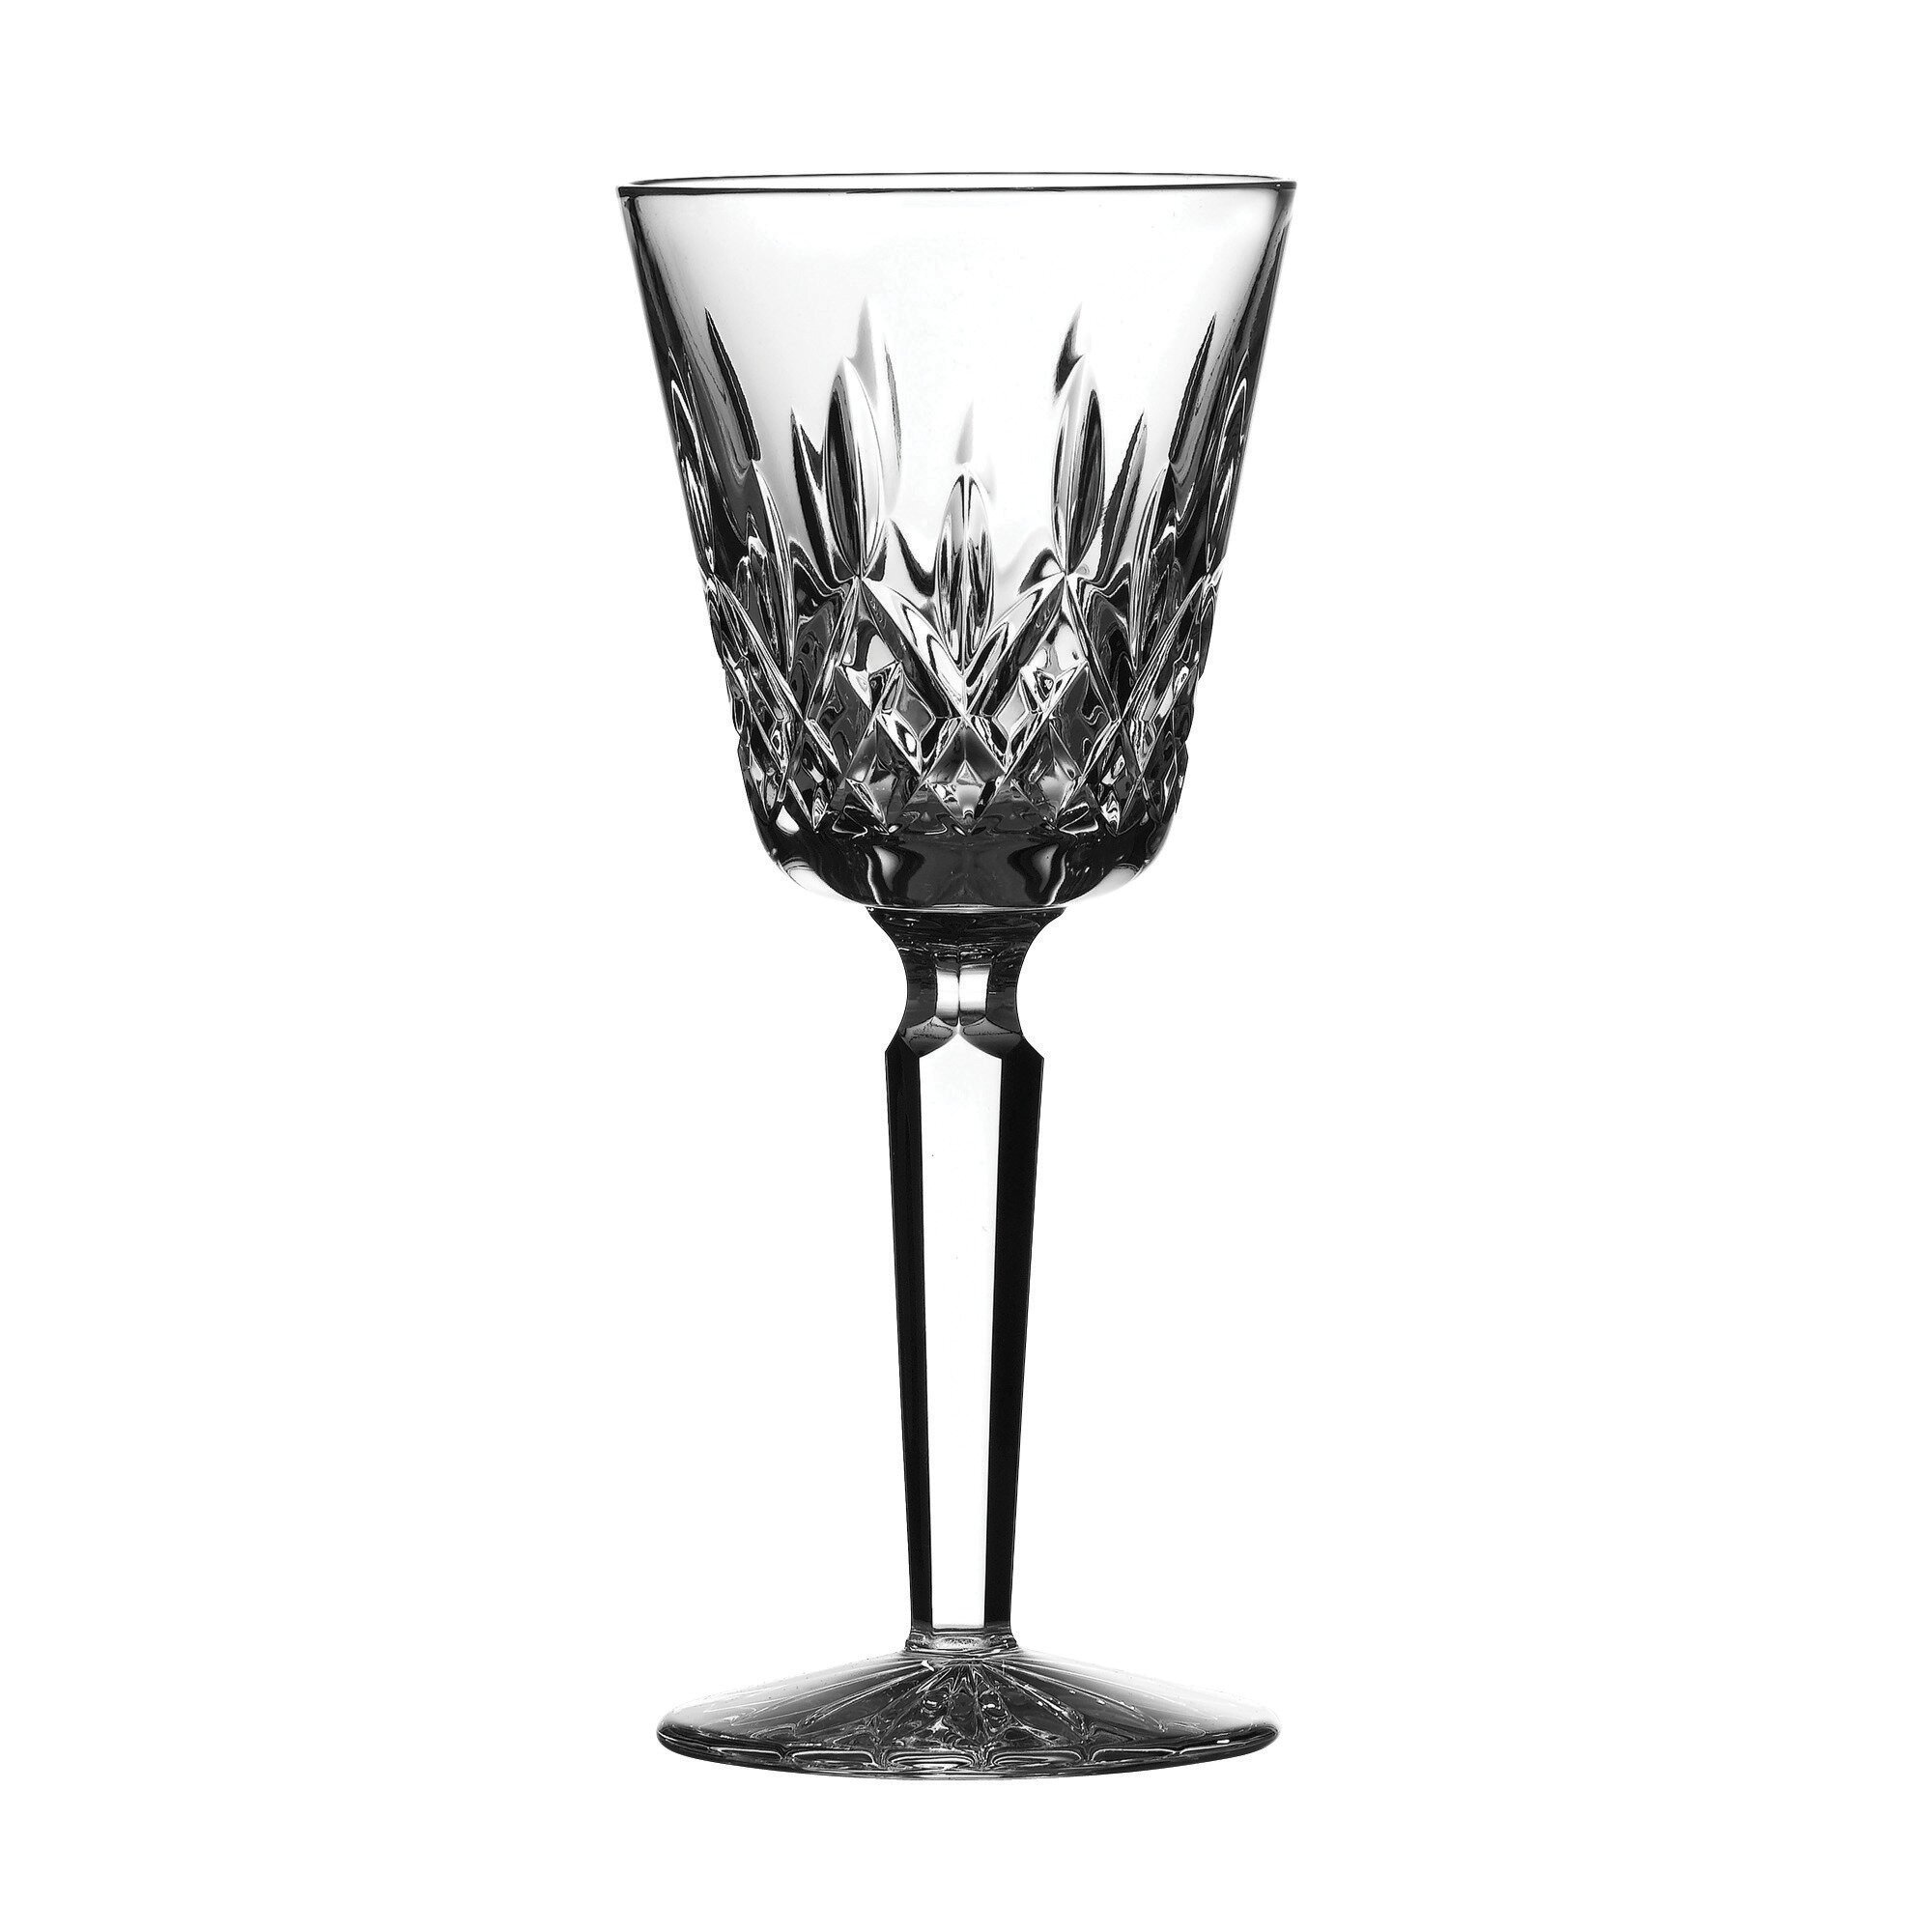 Waterford Crystal Lismore Cut Glass Tall Wine Glass, Set of 2